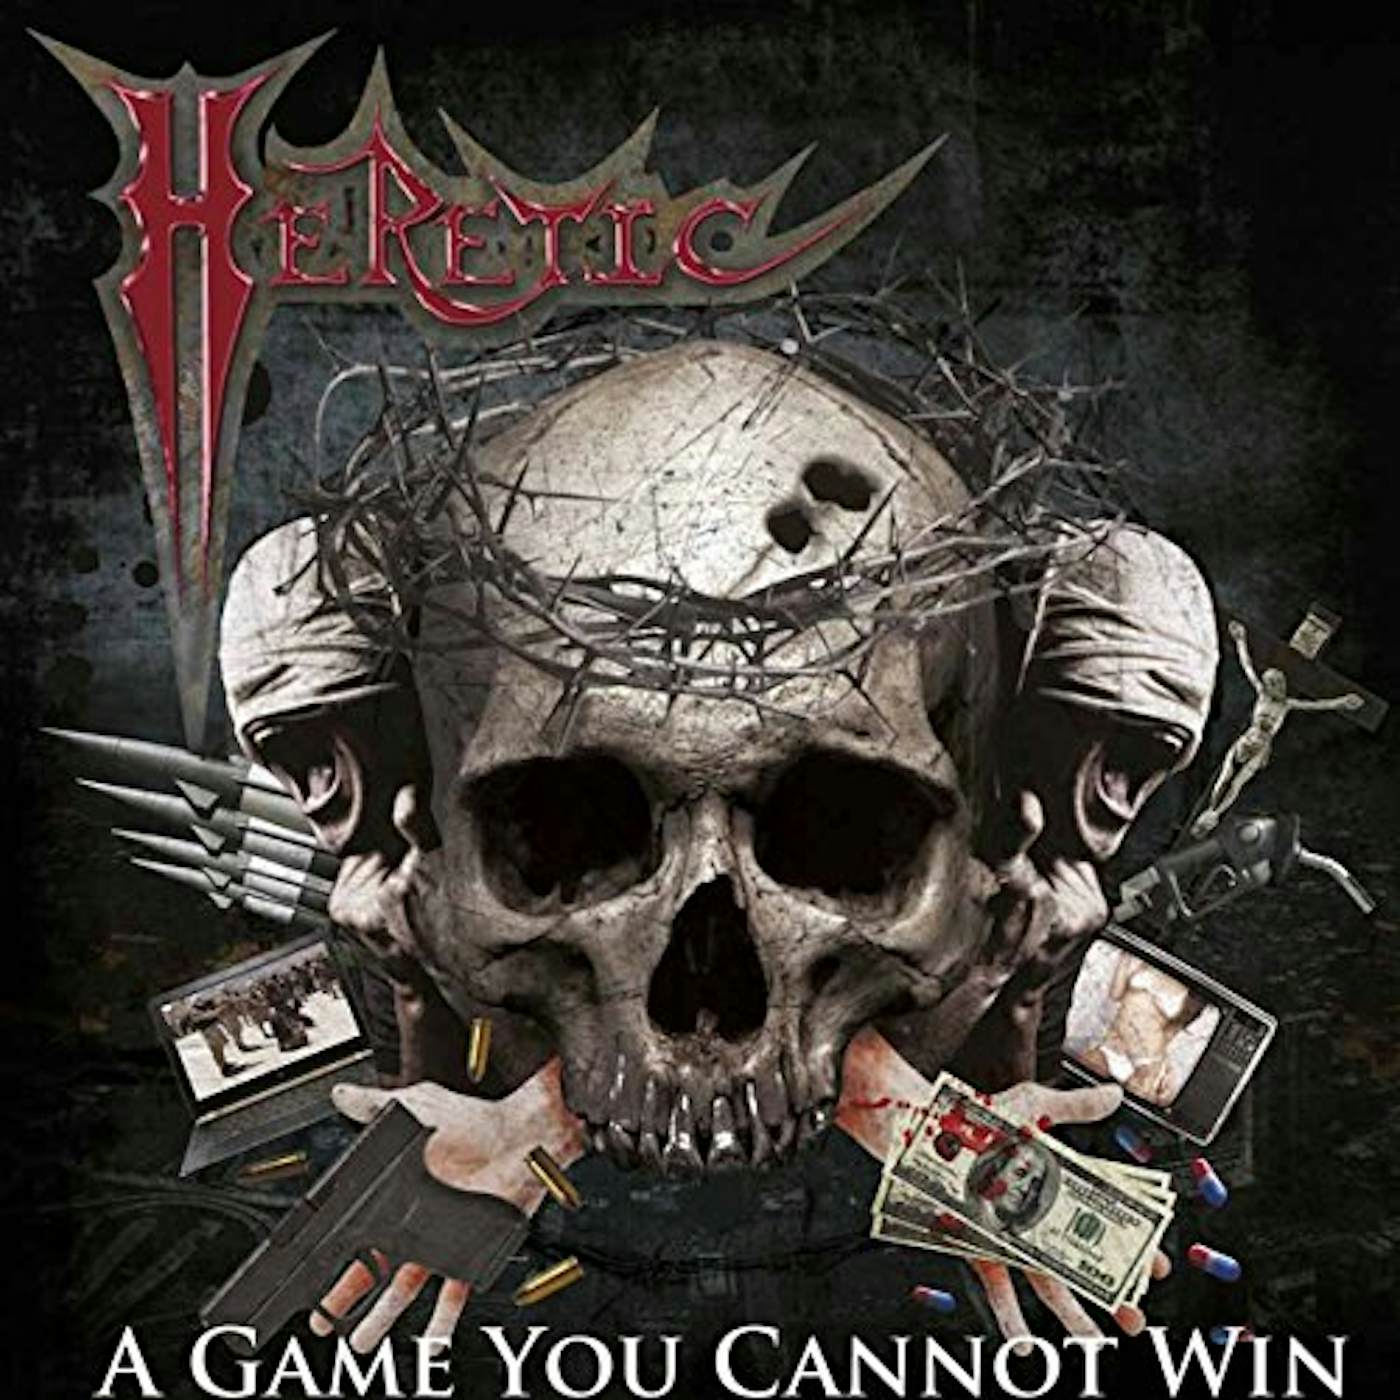 Heretic GAME YOU CANNOT WIN CD